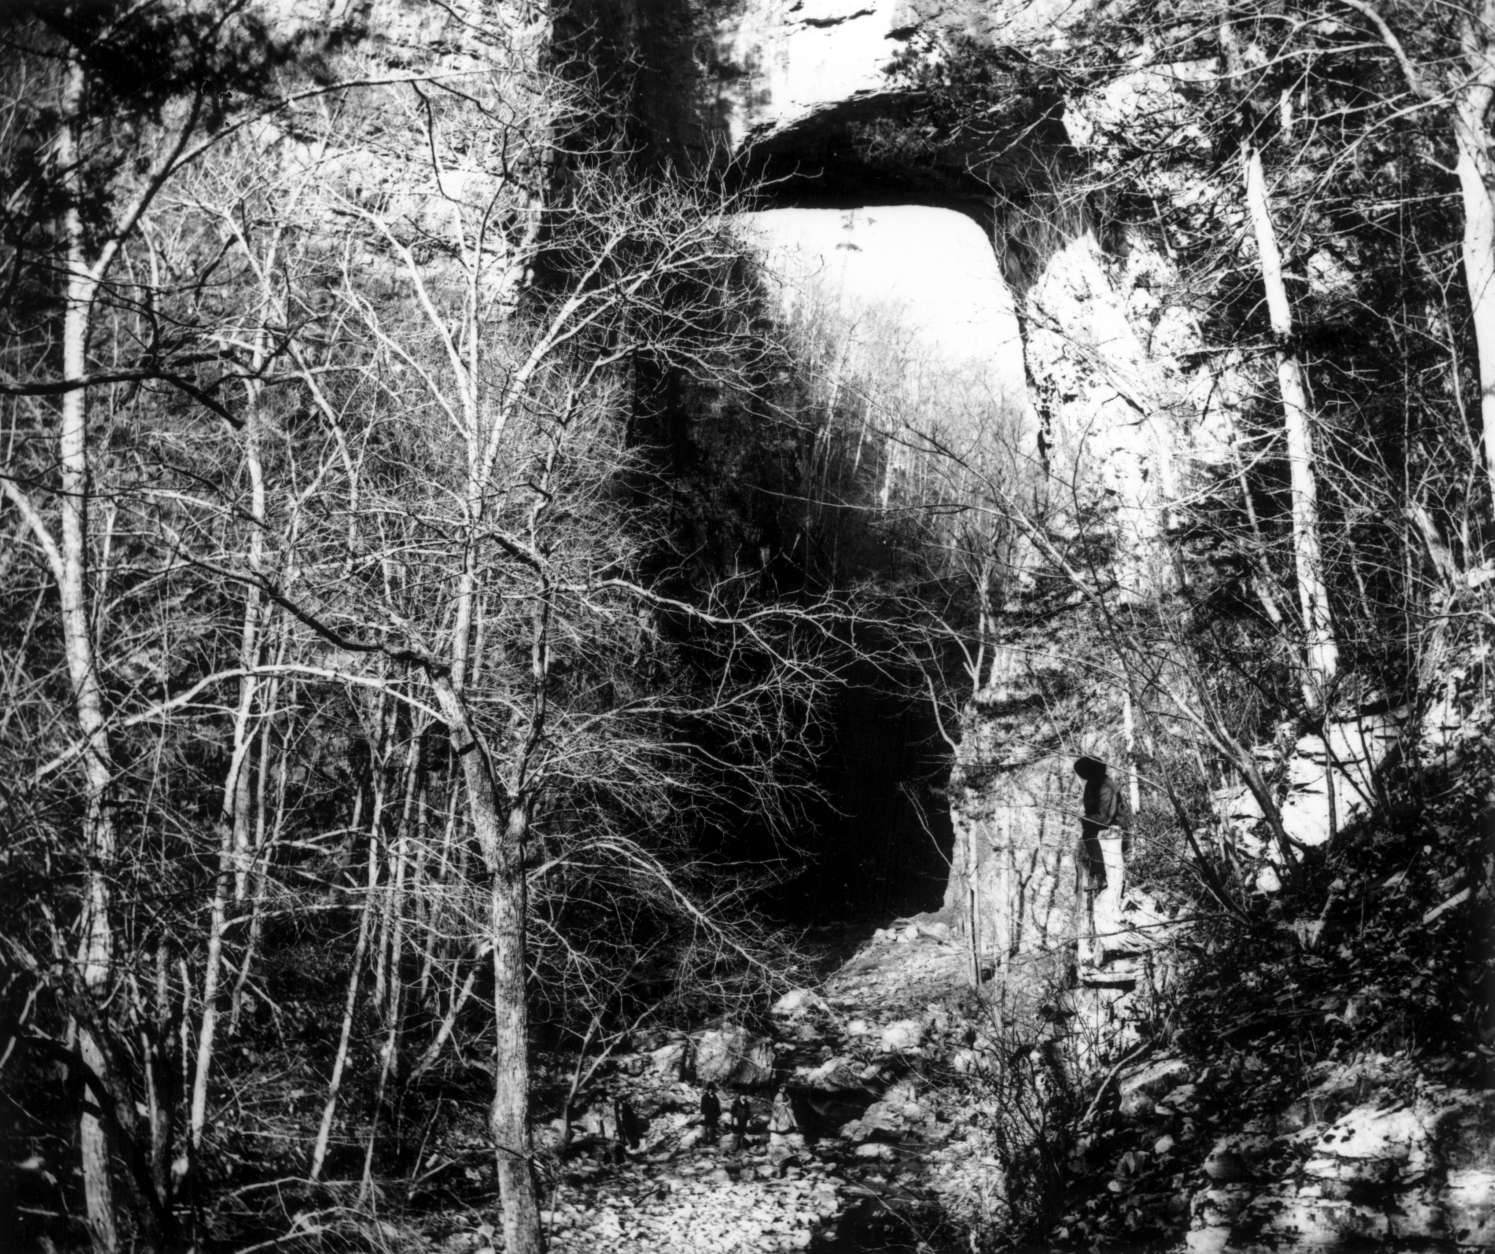 1859:  The arch formation known as 'Natural Bridge' near the Blue Ridge Mountains, Virginia.  (Photo by William England/London Stereoscopic Company/Getty Images)